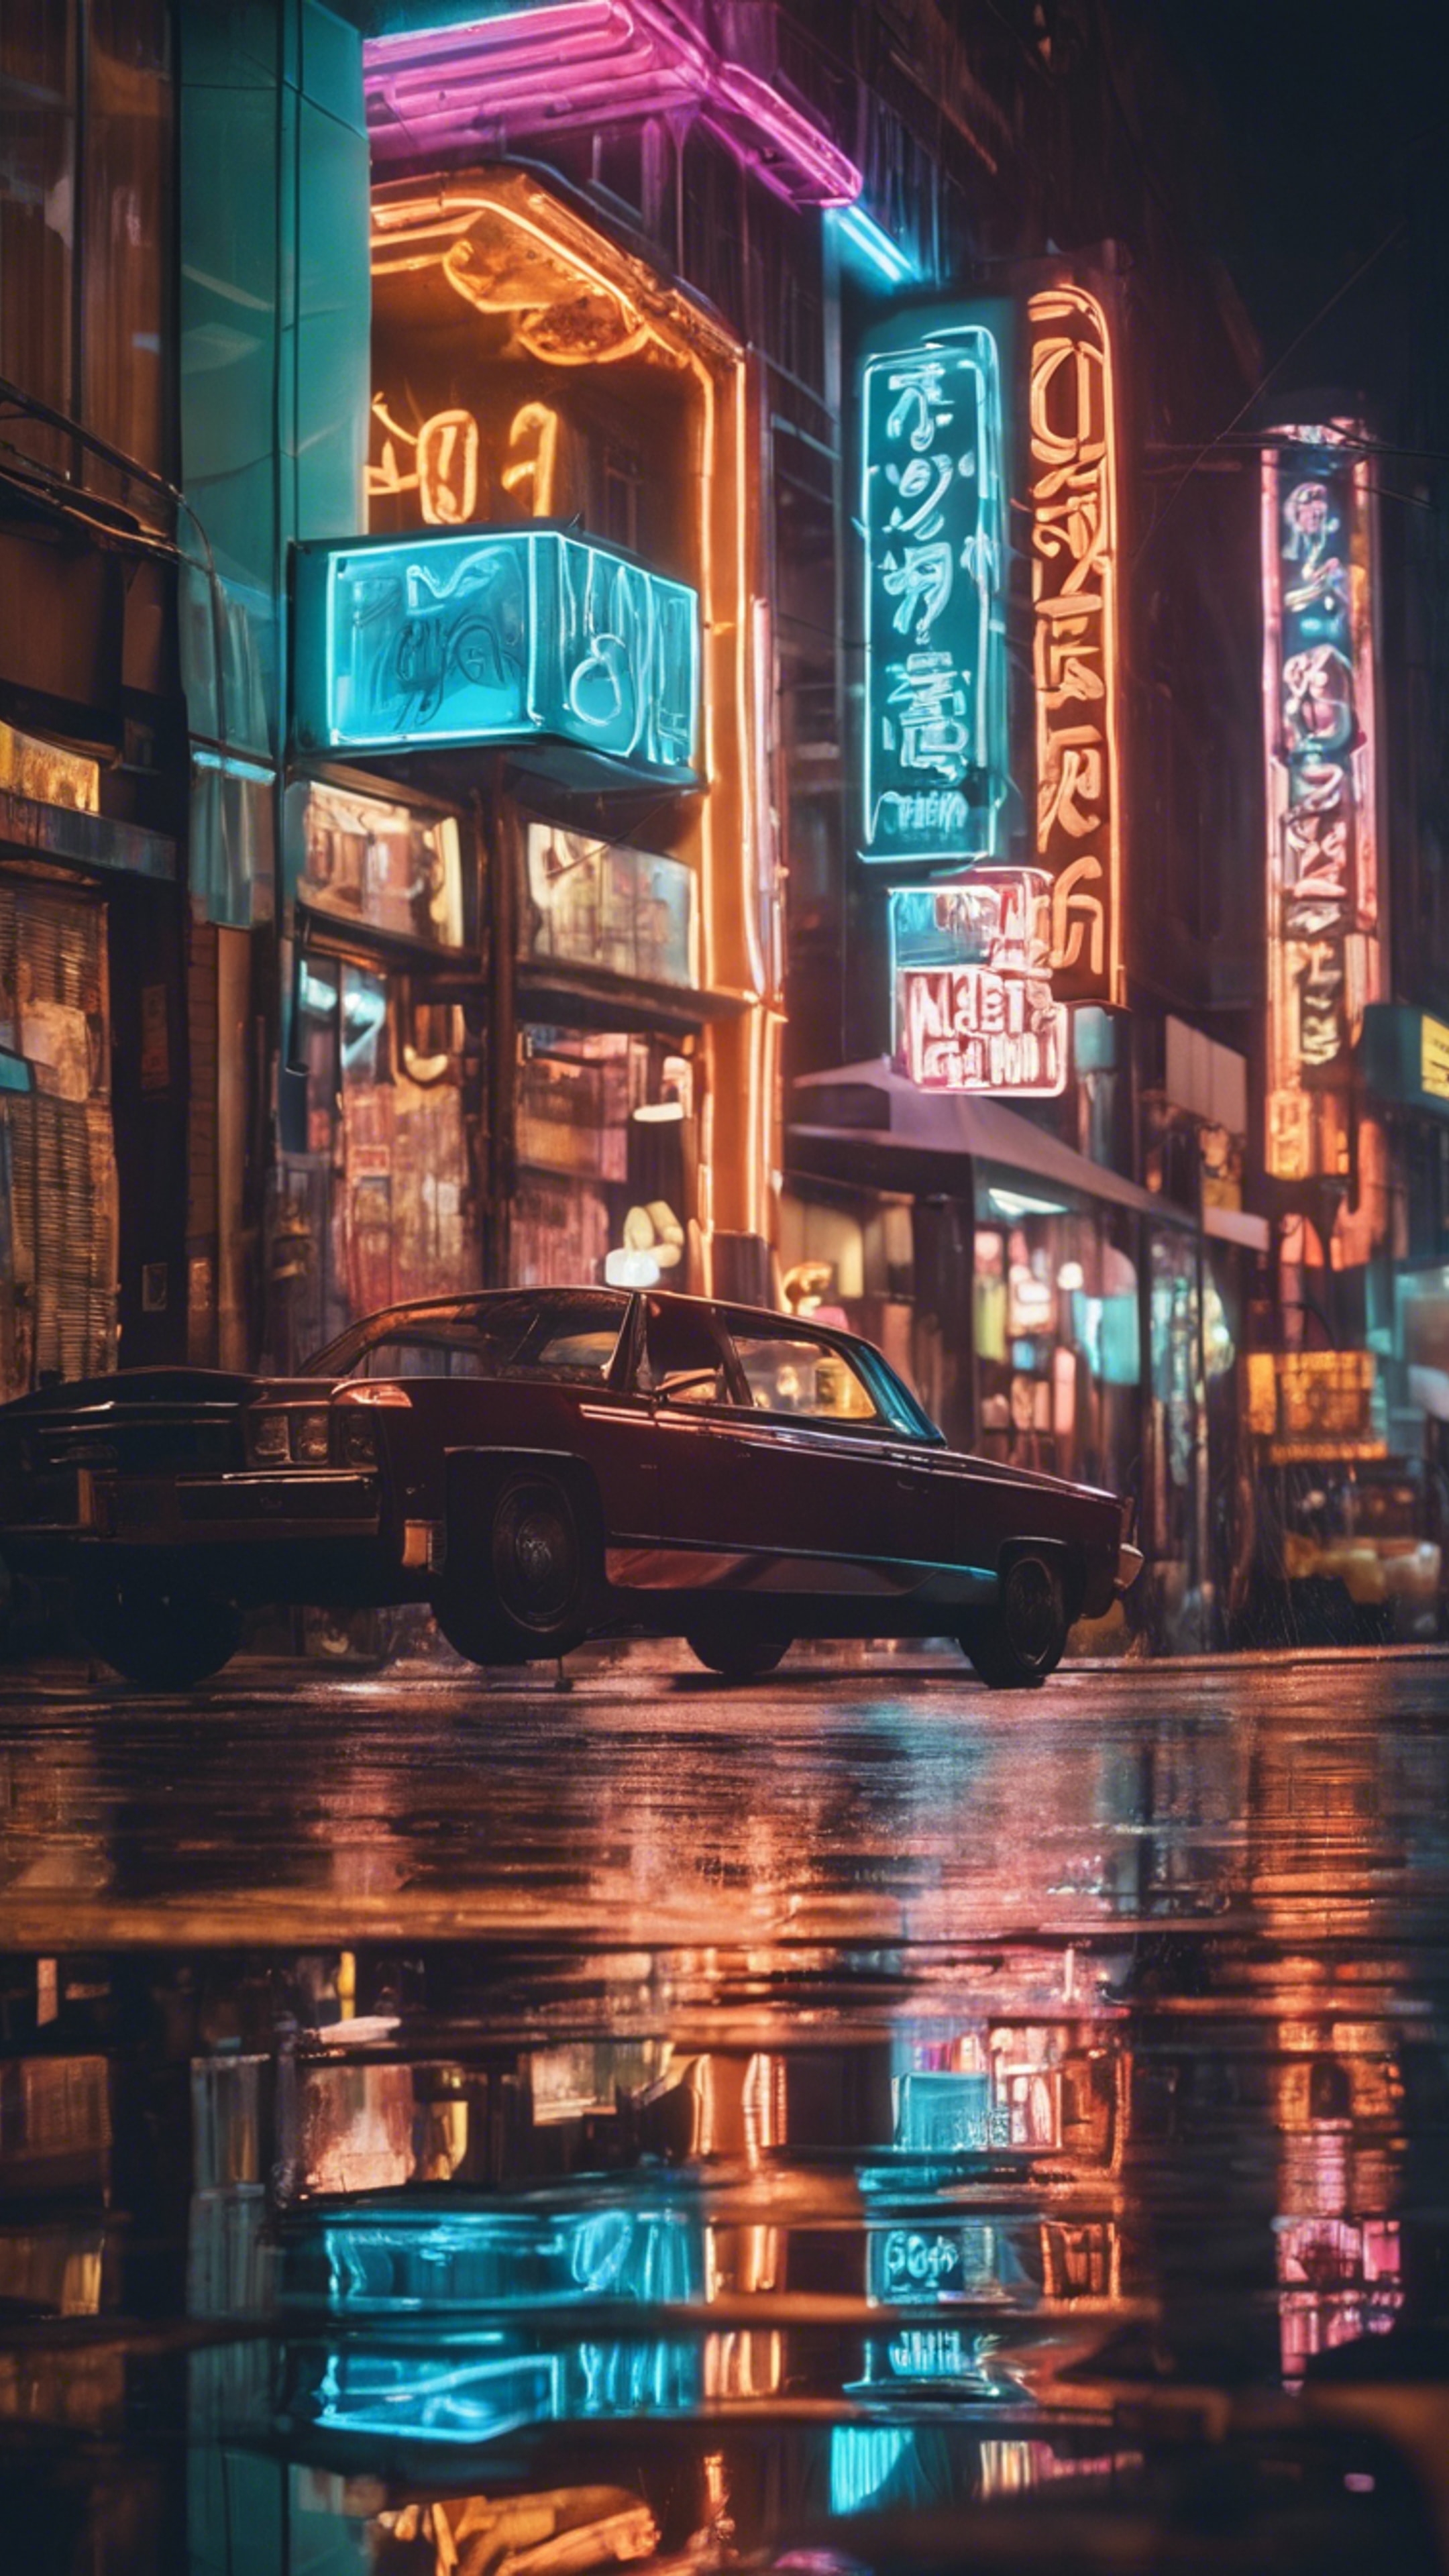 A dream vision of neon signs reflected on wet city streets at night. Wallpaper[79232e509baa4ed0a24c]